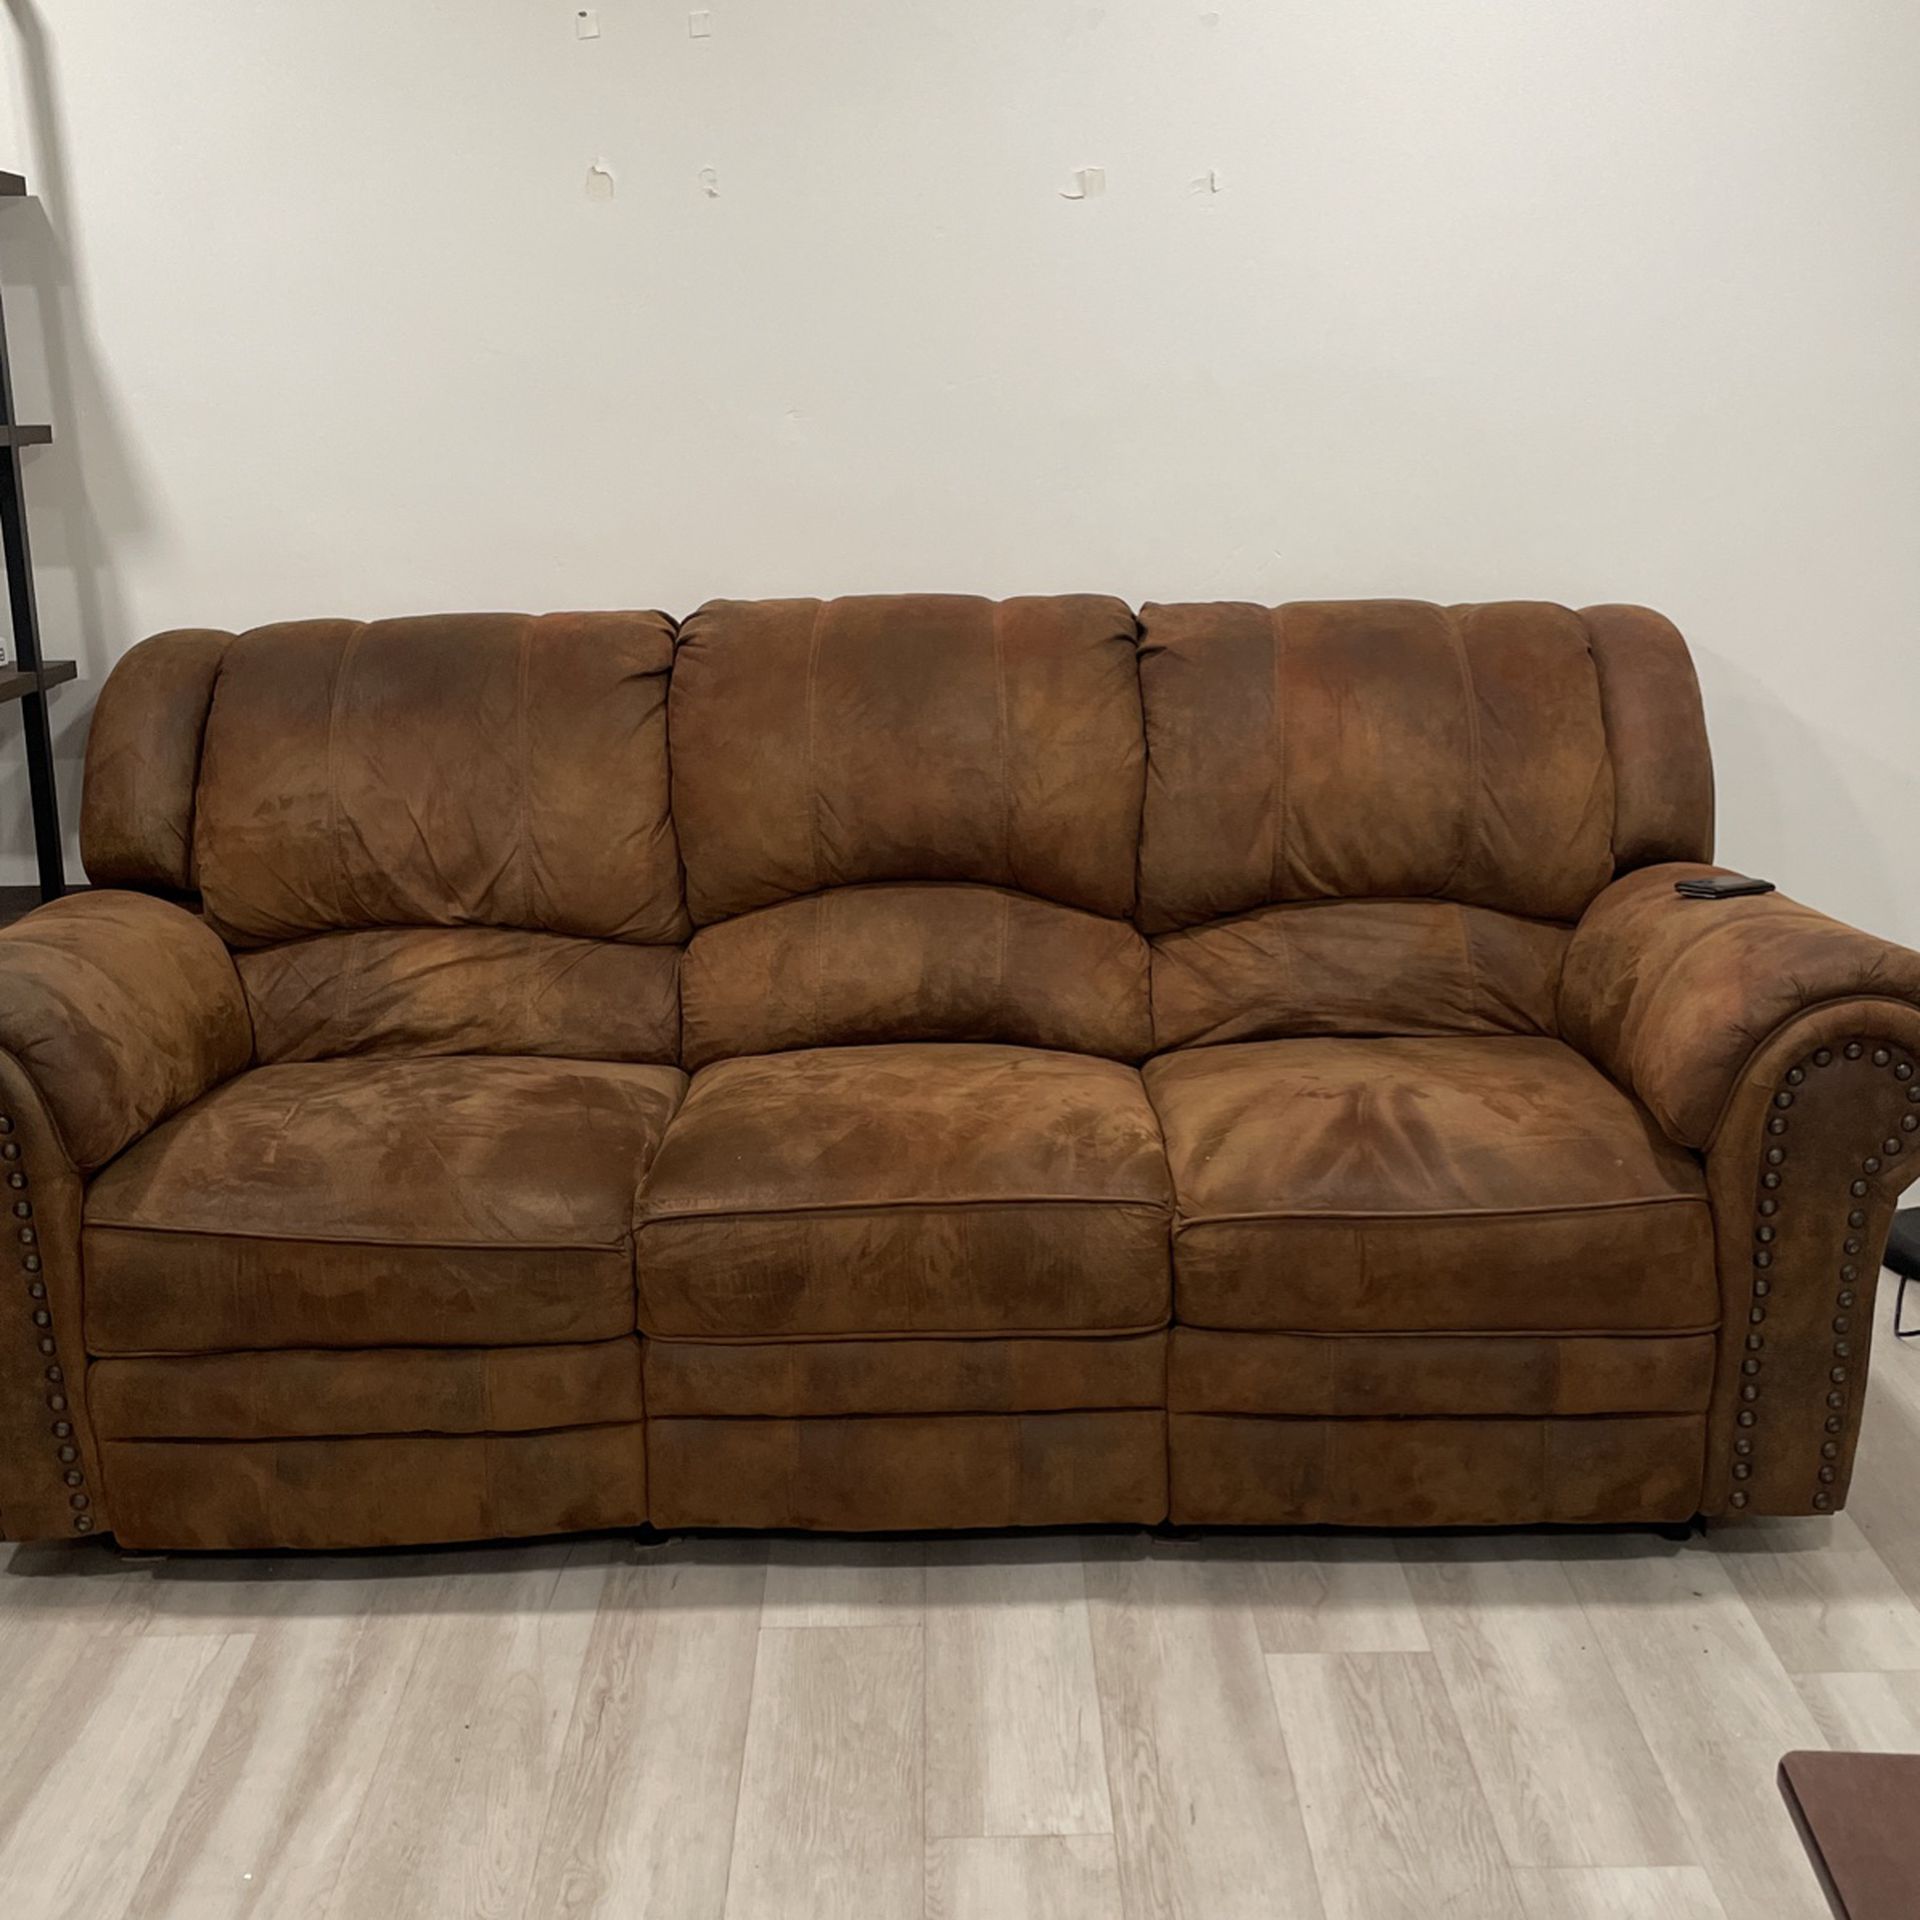 Recliner Couch And Chair Set